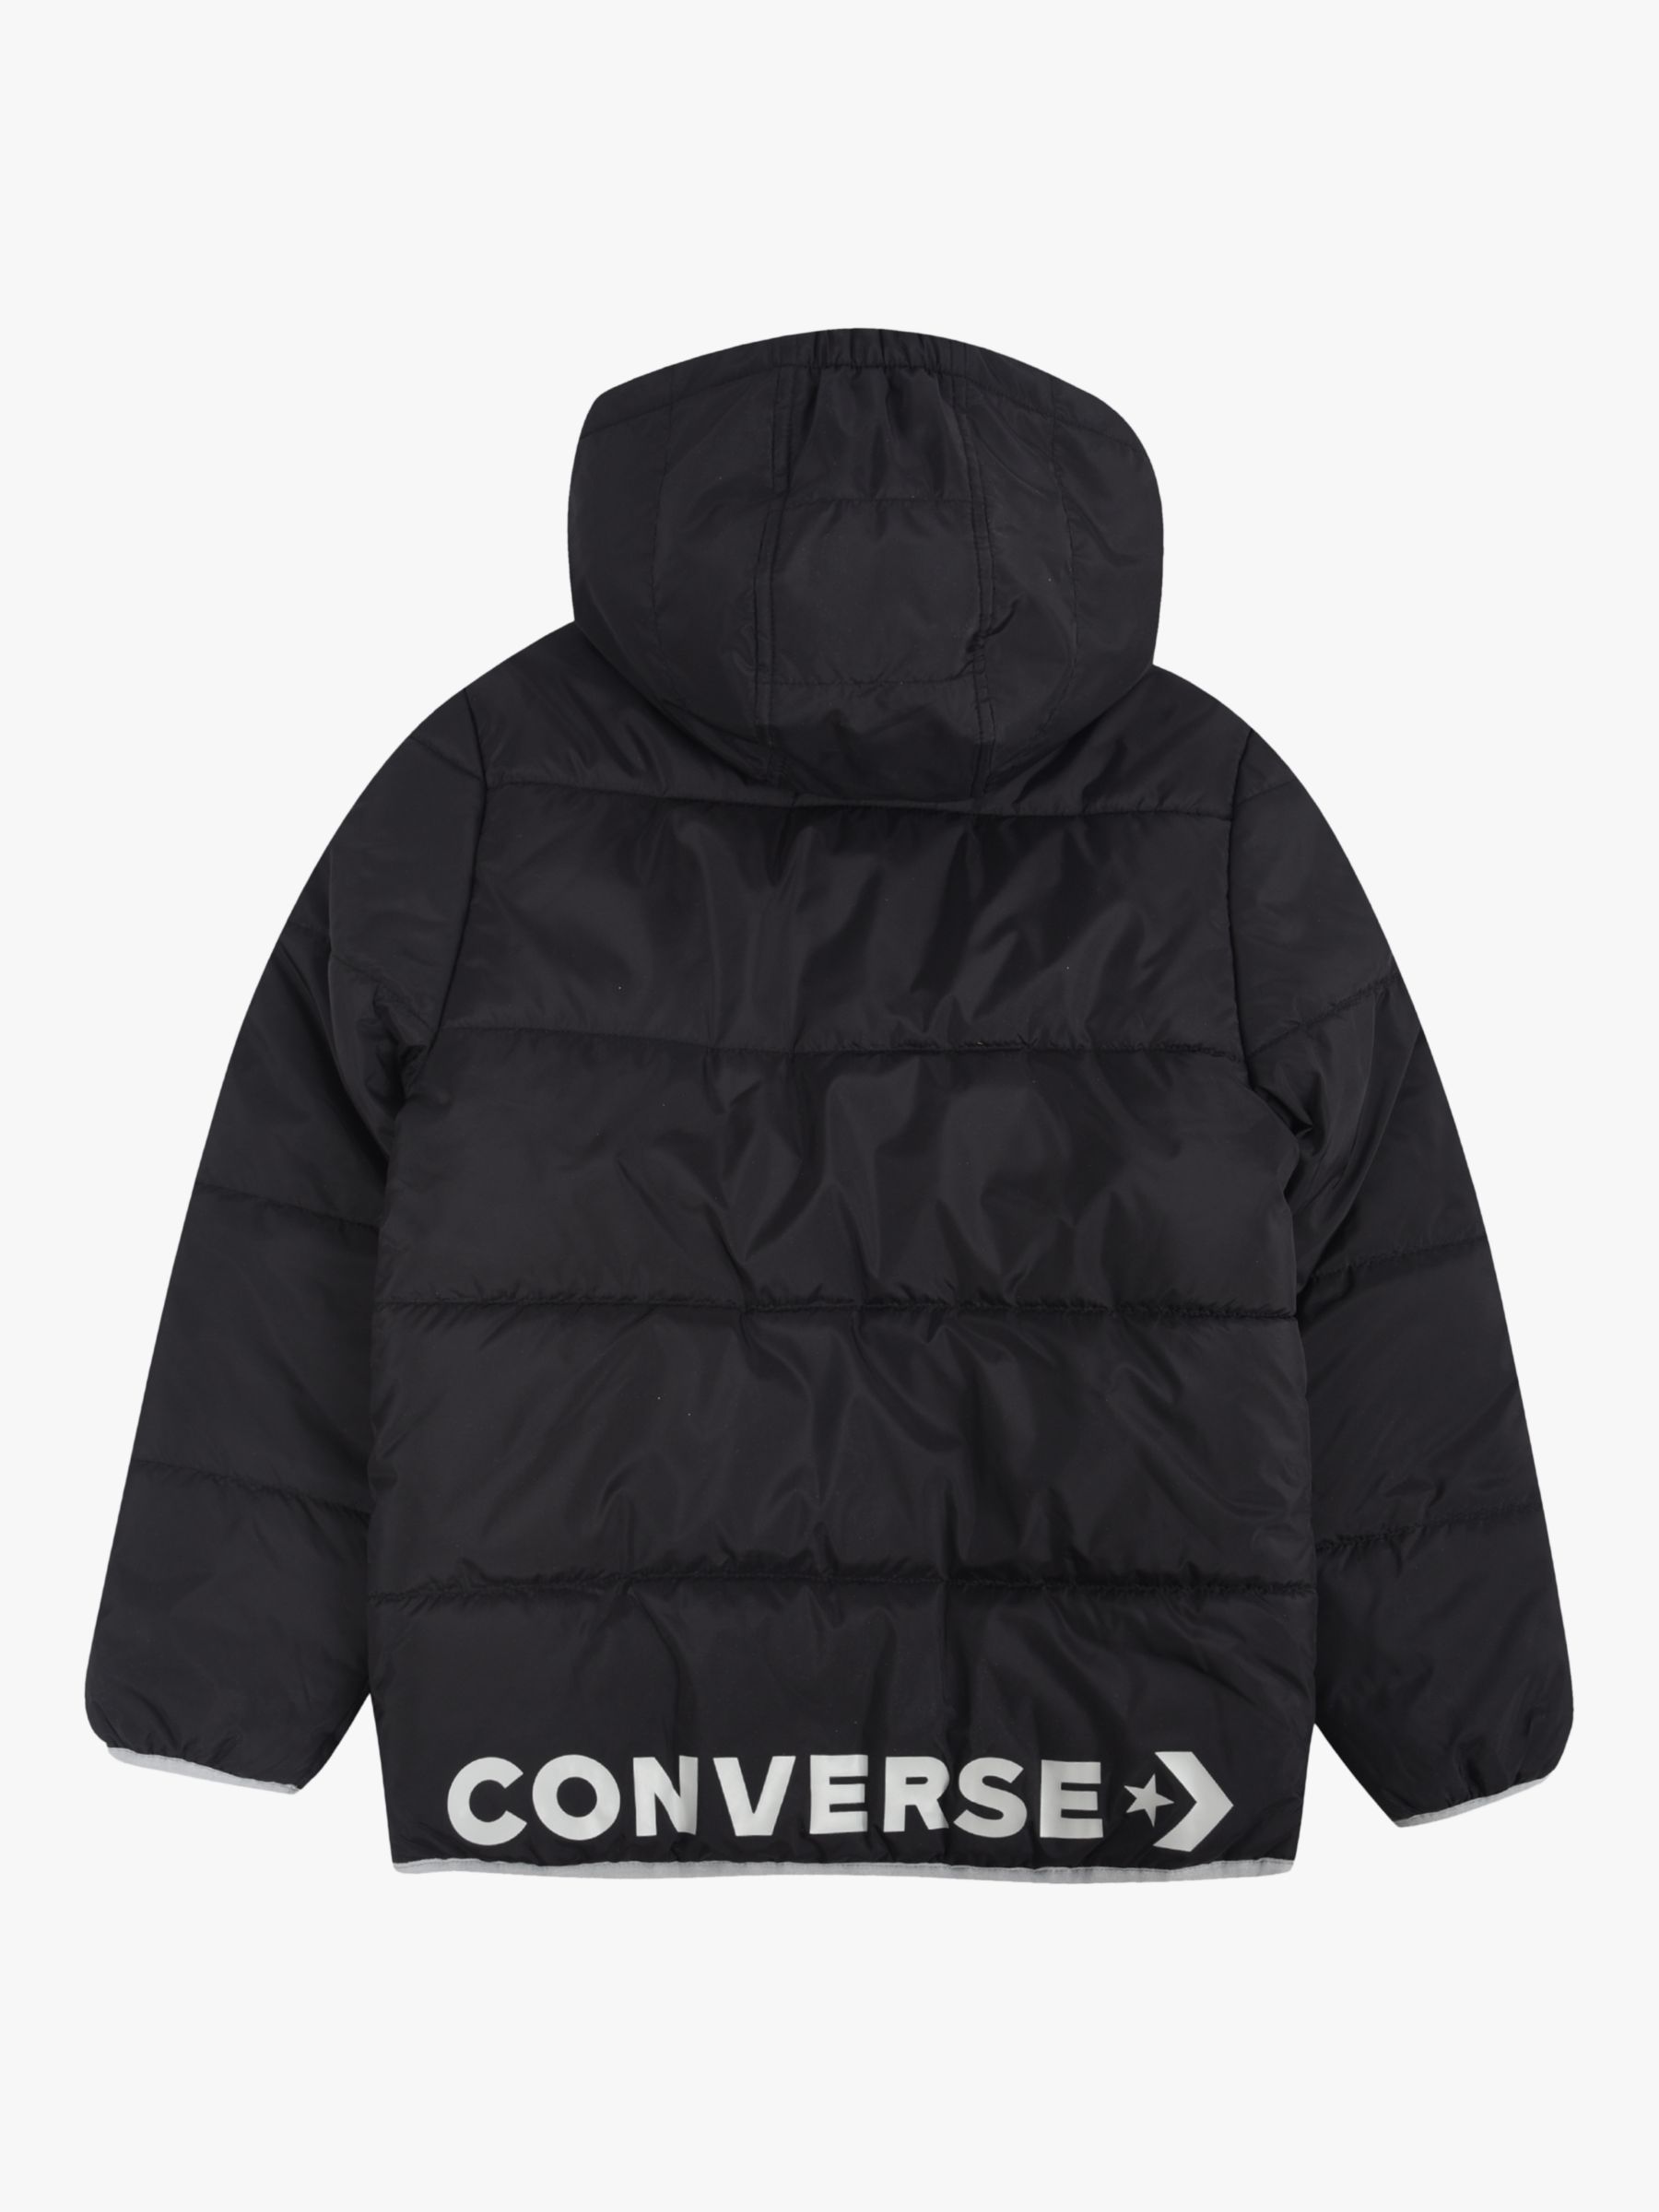 converse quilted jacket